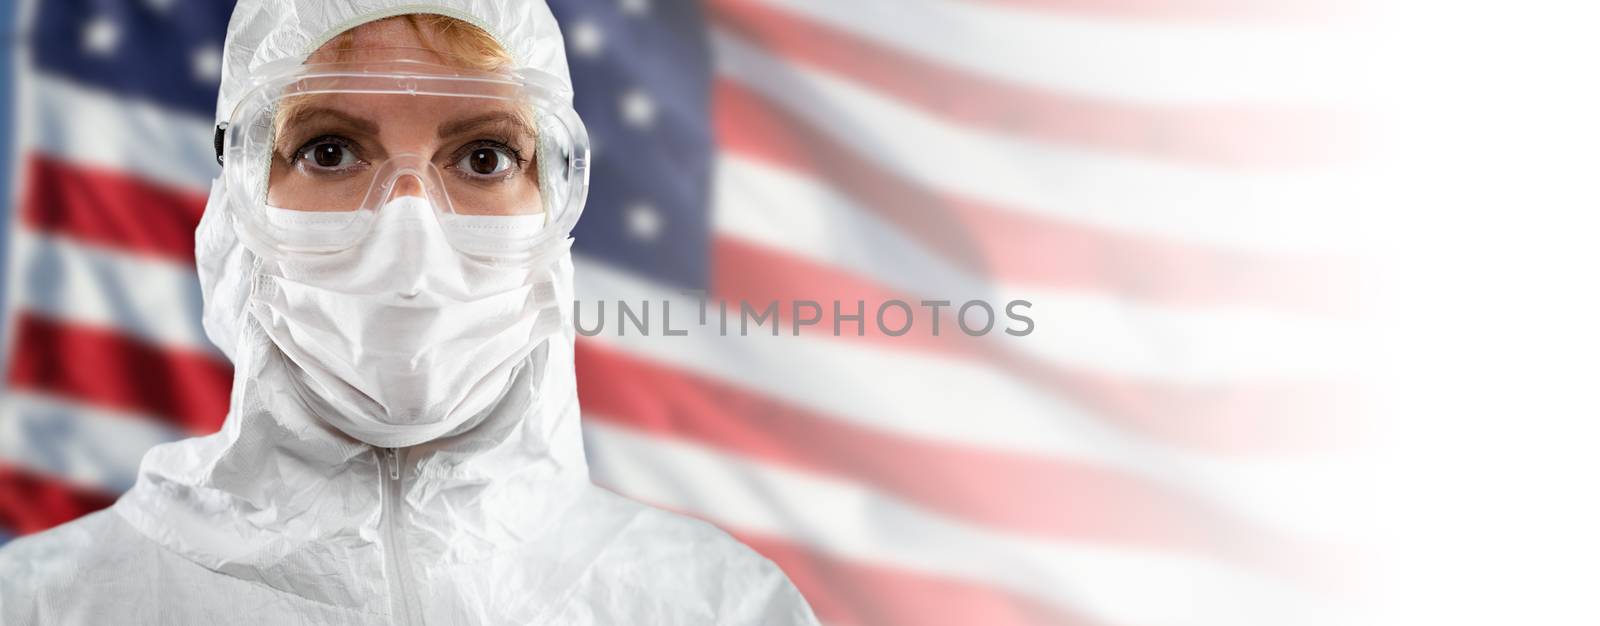 Doctor or Nurse Wearing Medical Personal Protective Equipment (PPE) Against The American Flag Banner. by Feverpitched